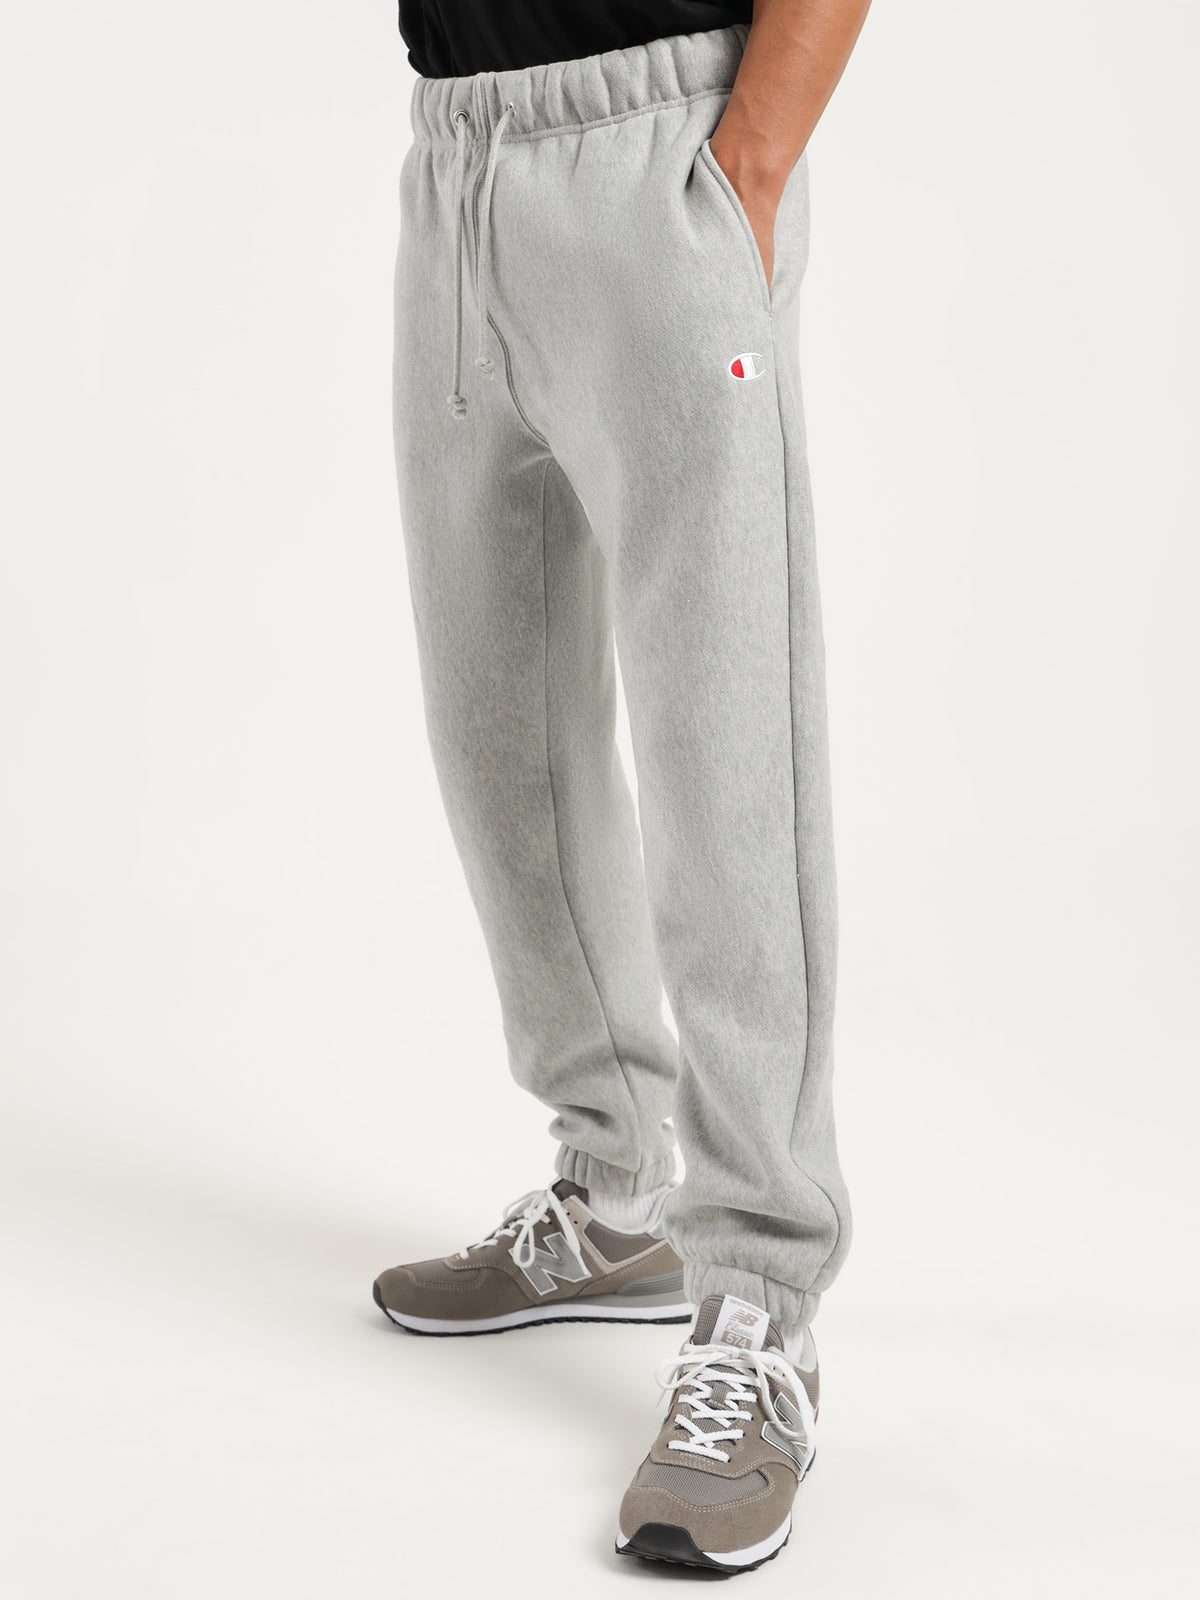 Reverse Weave Trackpant in Grey Marle